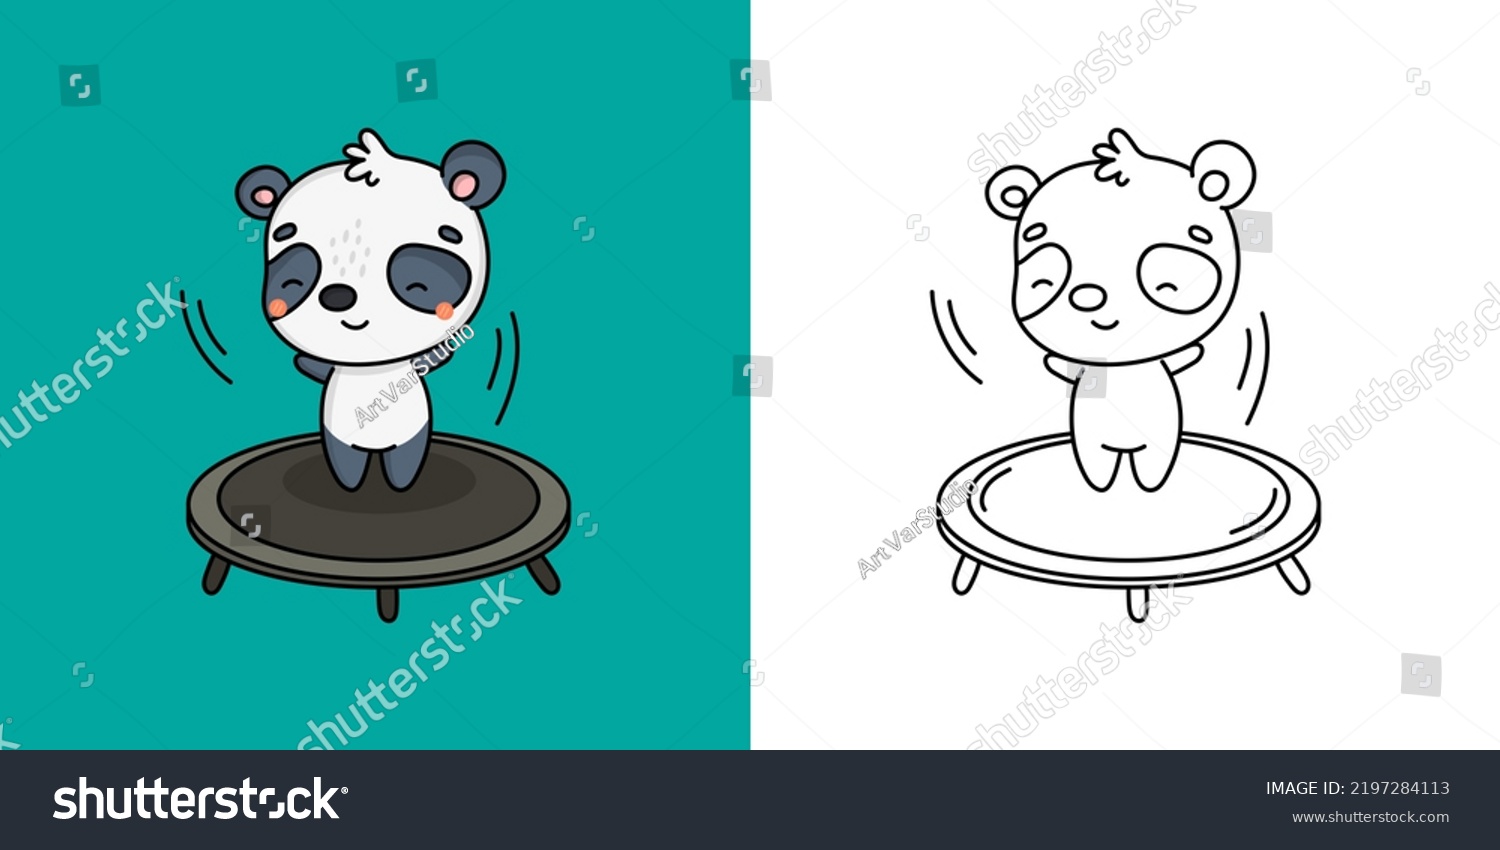 SVG of Kawaii Clipart Panda Bear Sportsman Illustration and For Coloring Page. Funny Panda Sportsman. Vector Illustration of a Kawaii Animal for Stickers, Baby Shower, Coloring Pages, Prints for Clothes.
 svg